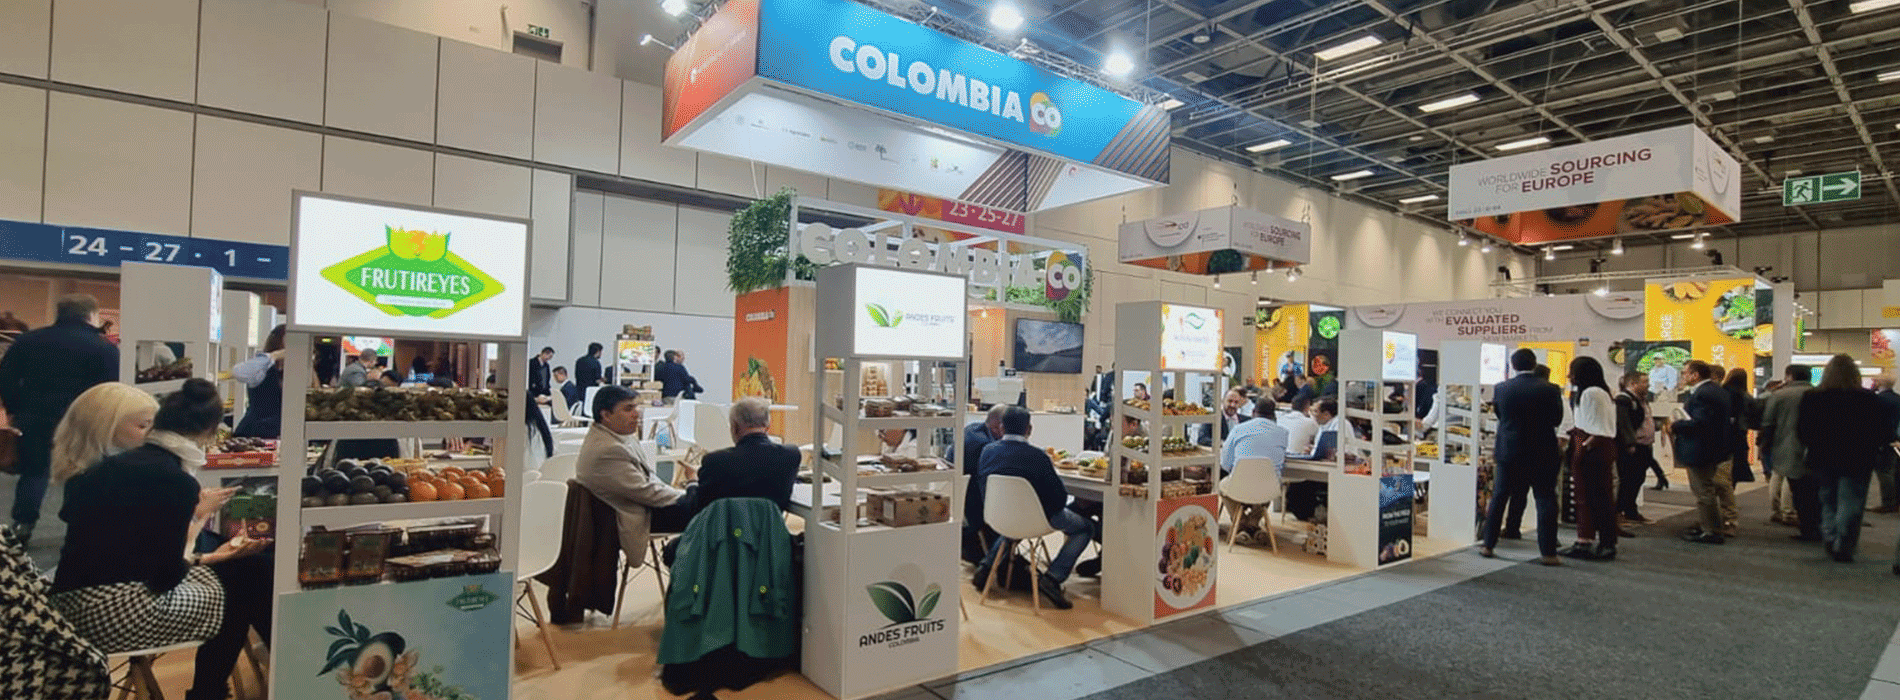 Colombia Co stand in Fruit Logistica